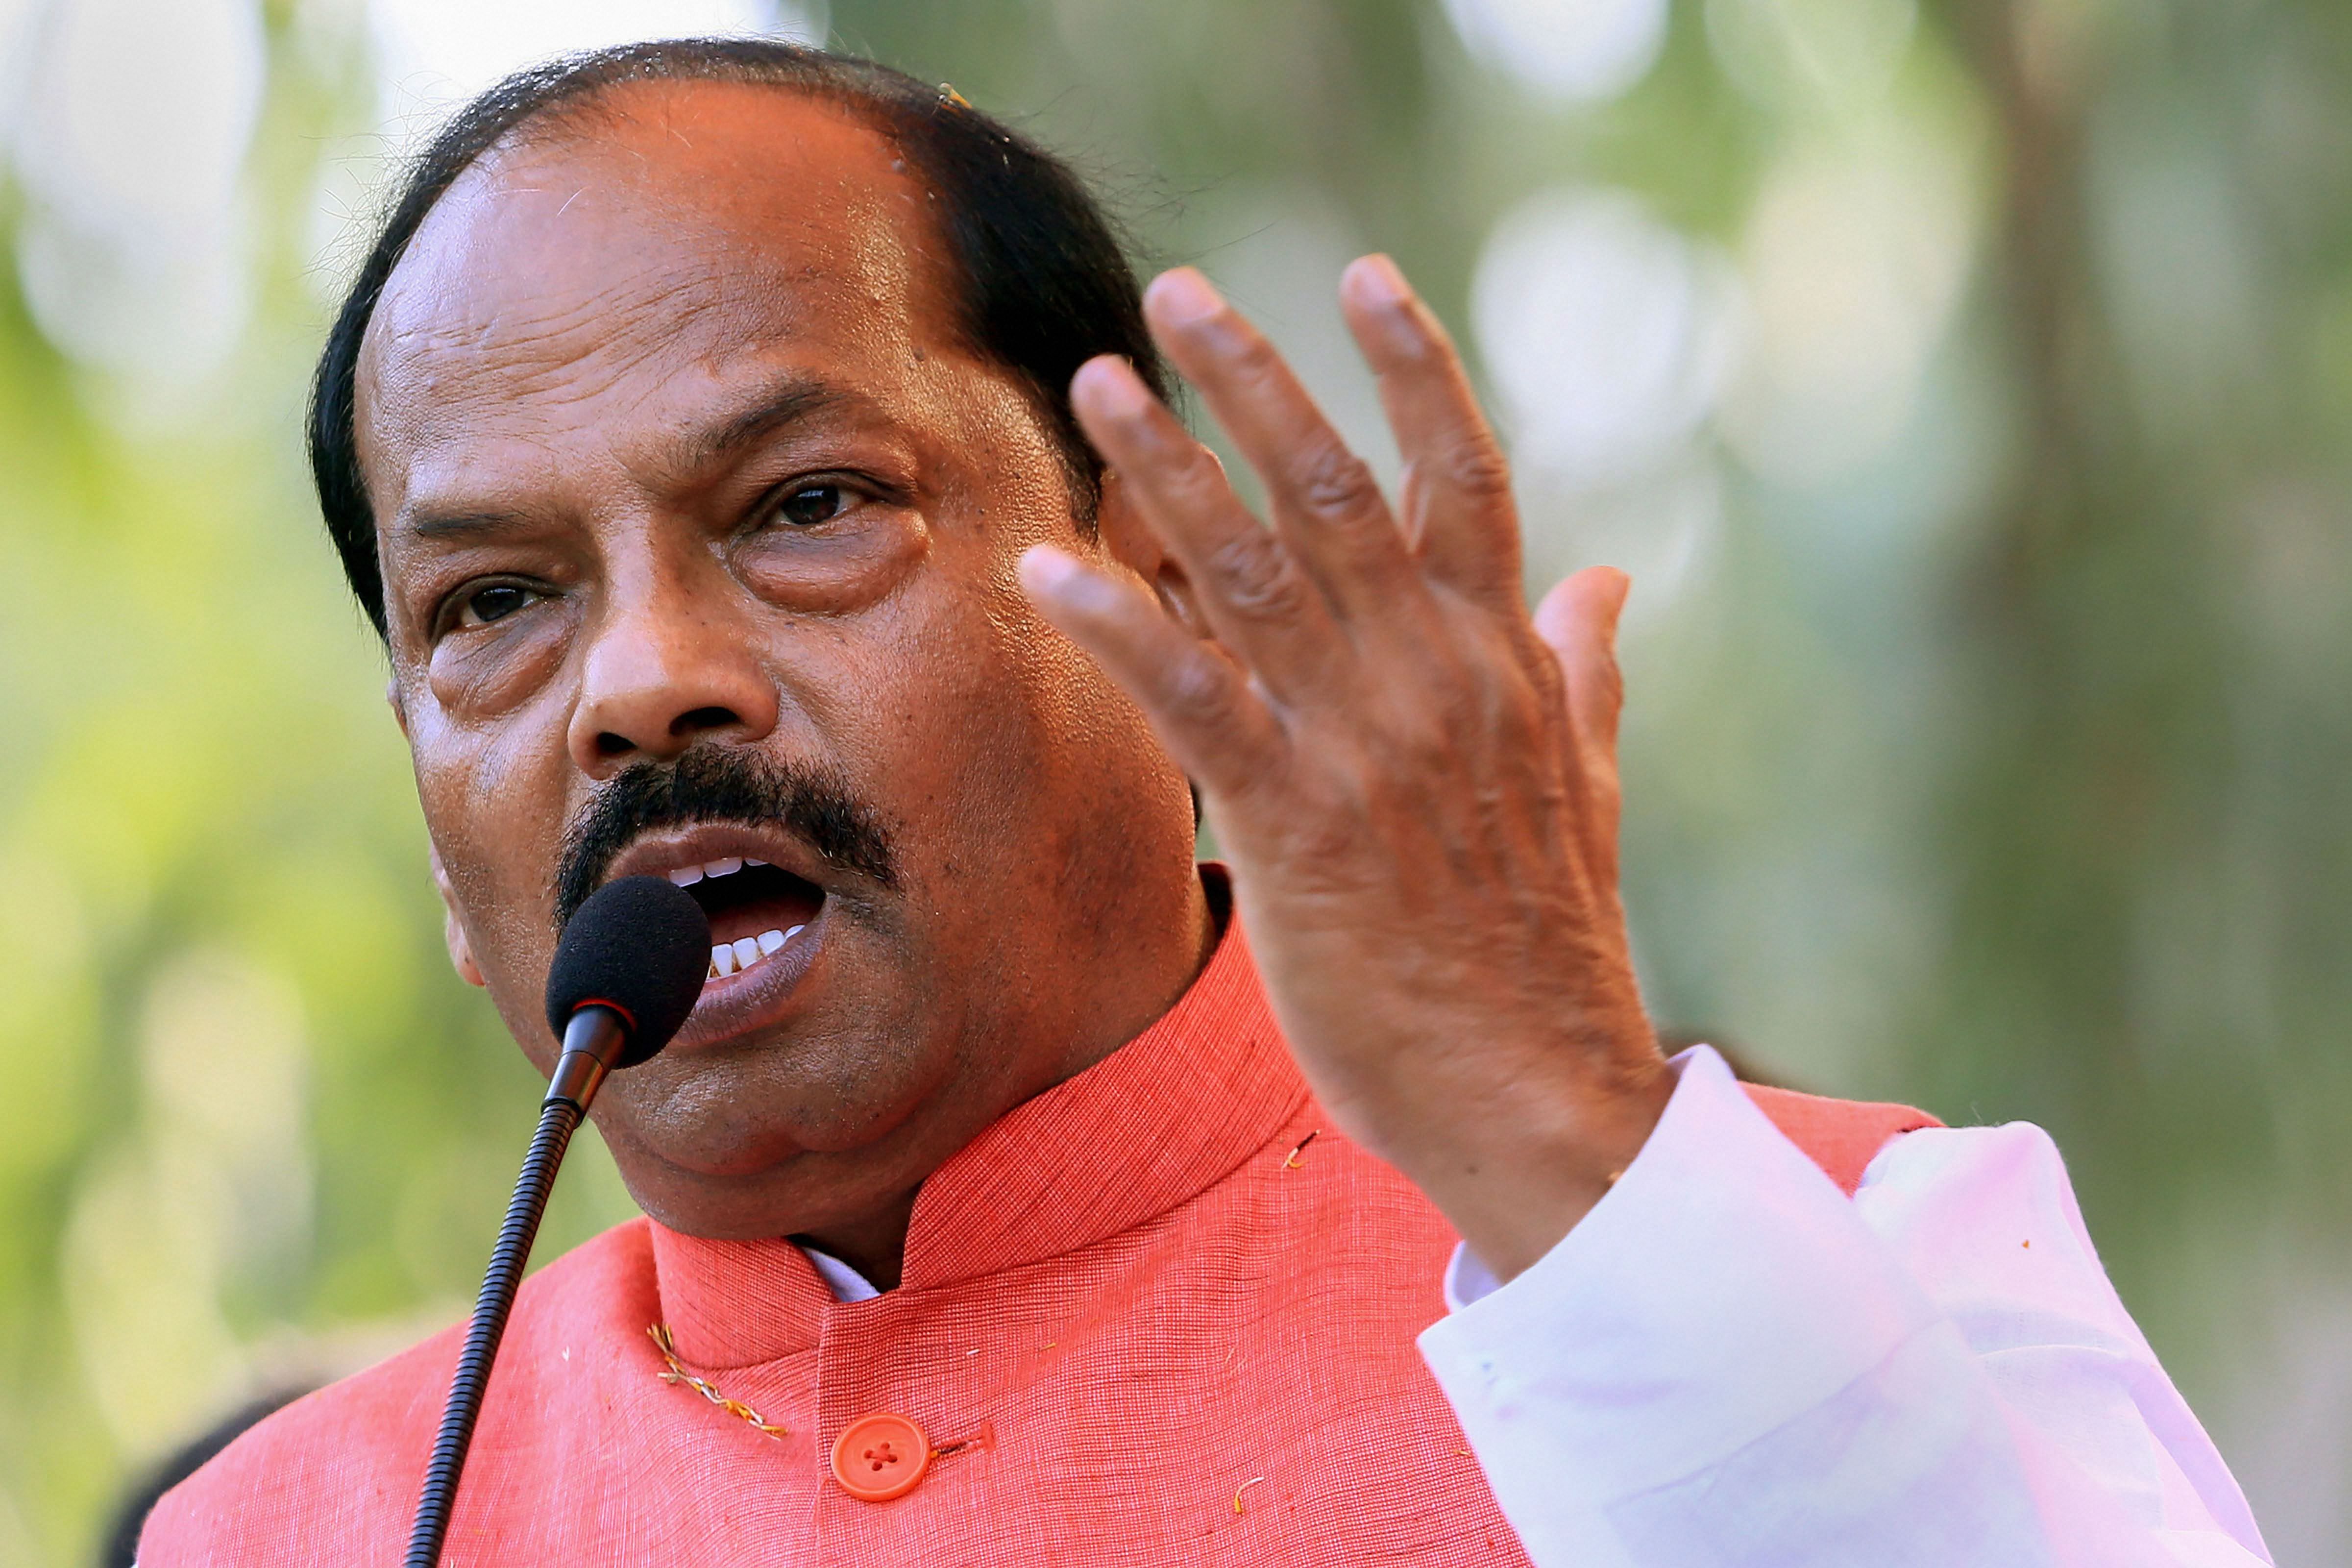 Jharkhand Chief Minister Raghubar Das addresses a public meeting after announcement of BJP's Palamu district candidates for upcoming Jharkhand Assembly Elections, in Daltanganj under Palamu district. (PTI Photo)